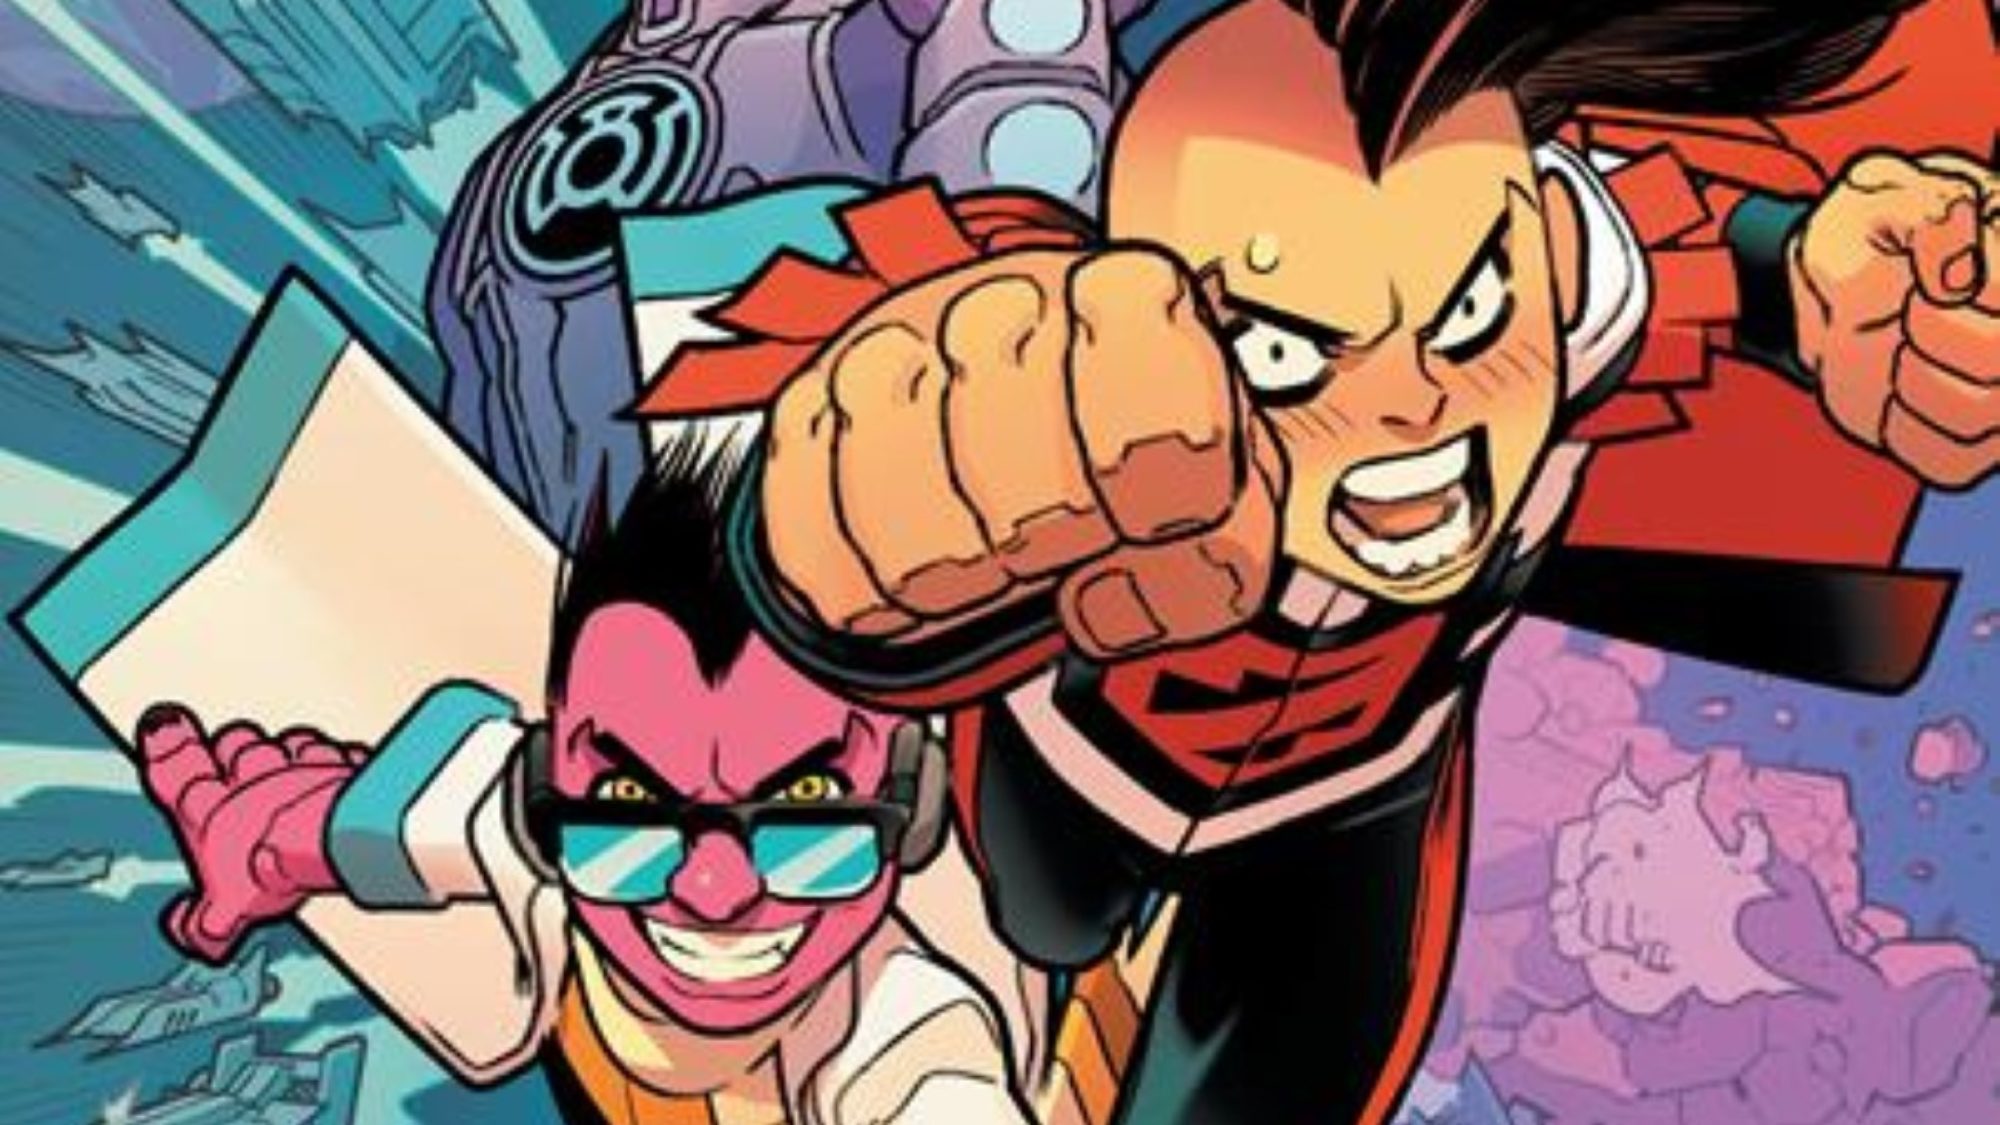 DC Comics Announce 'Sinister Sons' Series Focusing On The Sons Of Zod &  Sinestro - The Aspiring Kryptonian - Superman Superfan